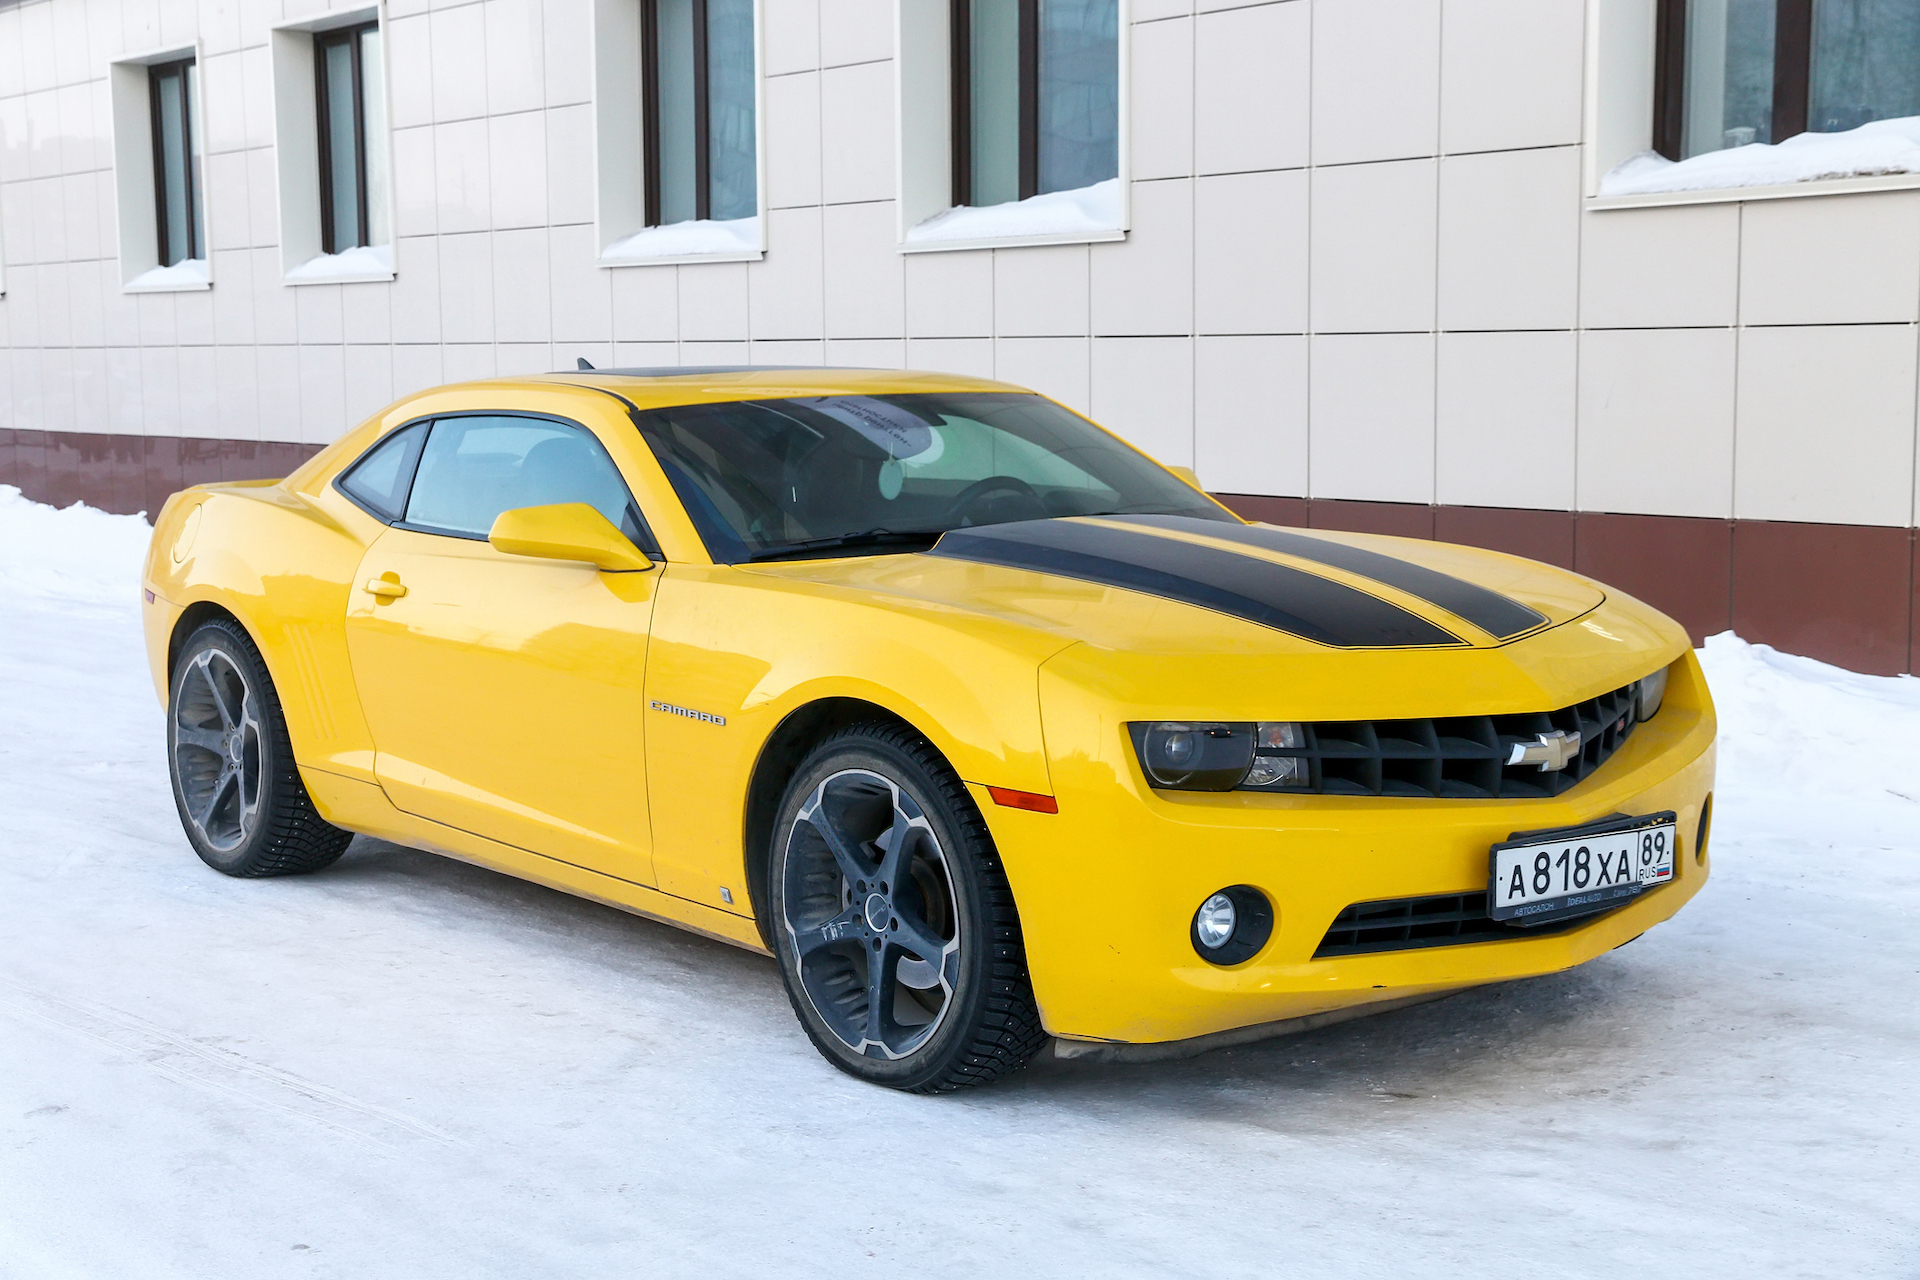 Novyy Urengoy, Russia - March 13, 2021: Yellow American muscle car Chevrolet Camaro V in the city street.